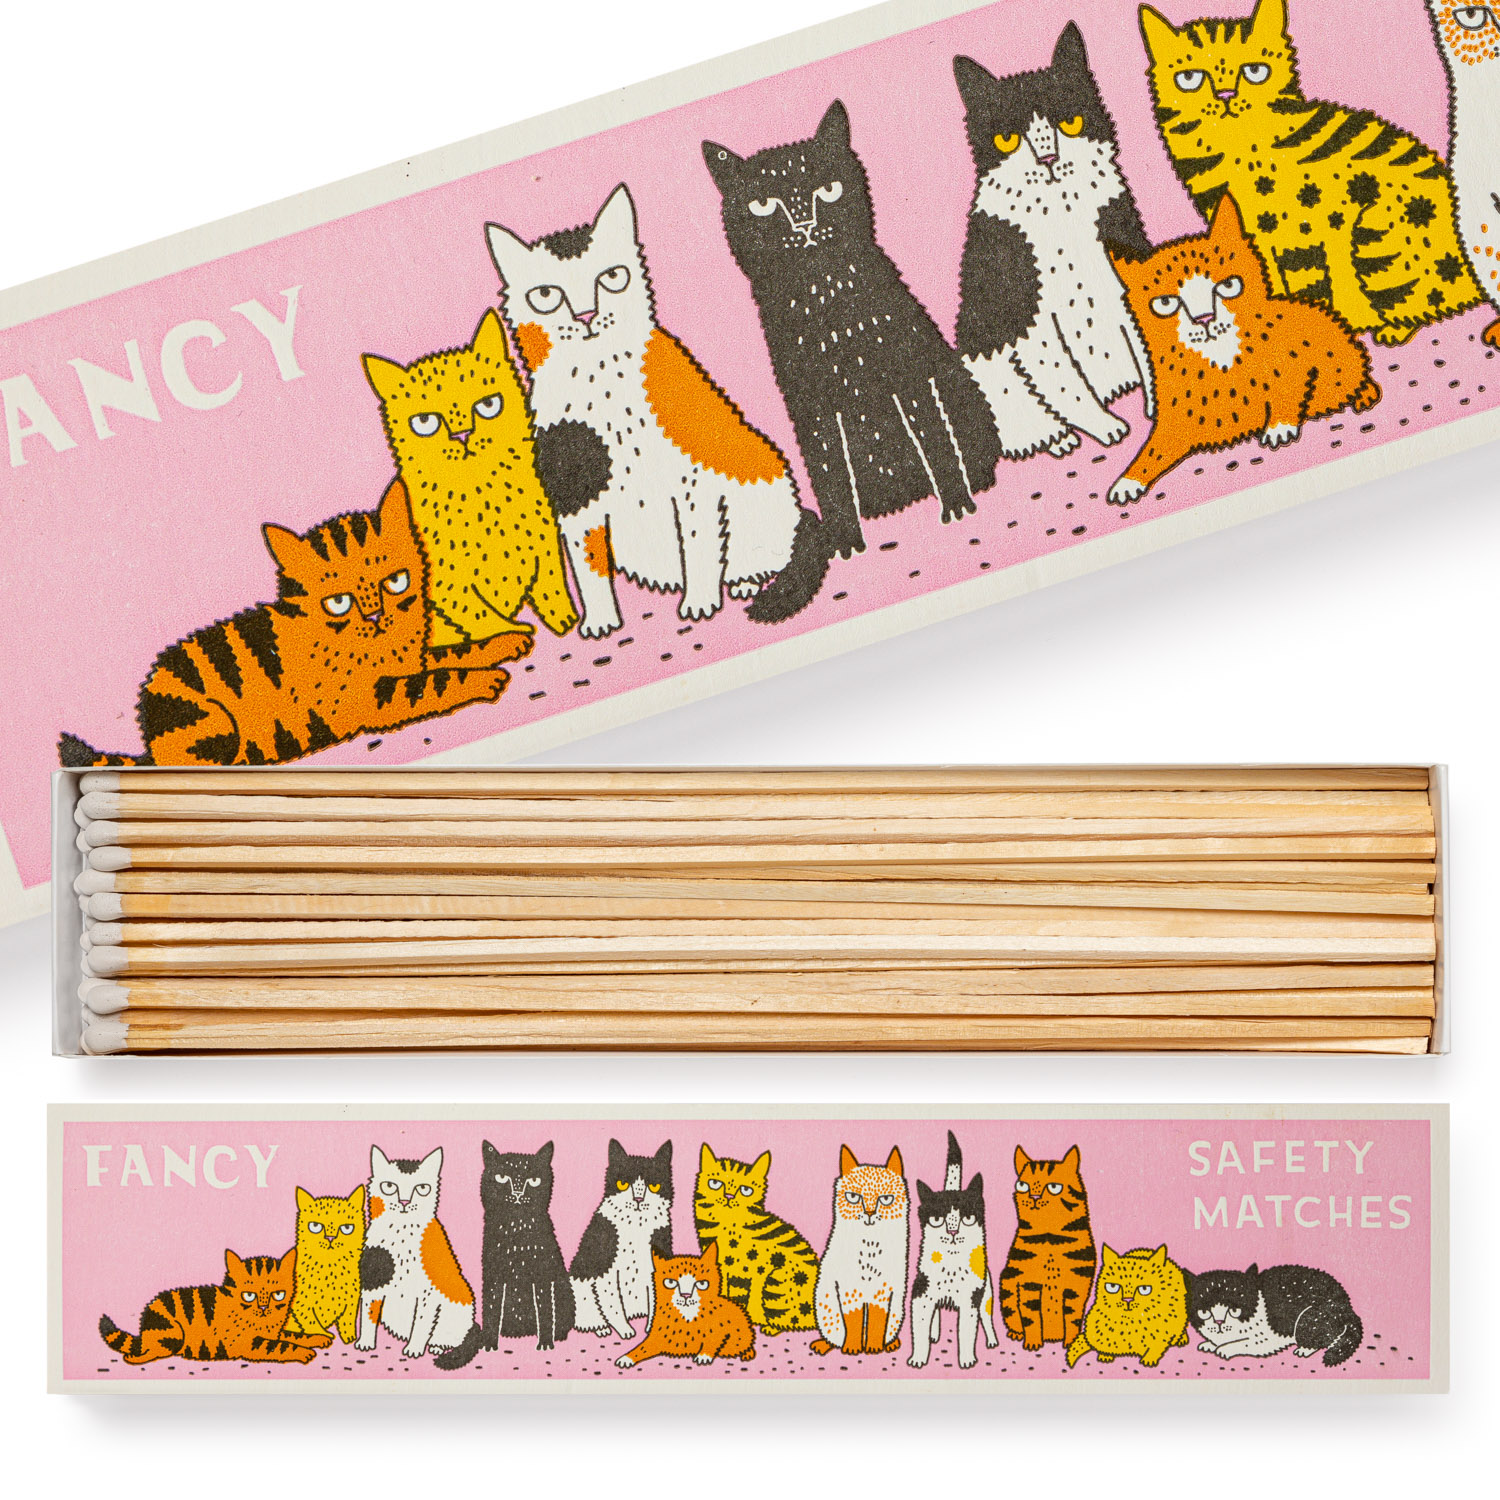 Fancy Cat Safety Matches - Long Matchboxes - Charlotte Farmer - from Archivist Gallery 